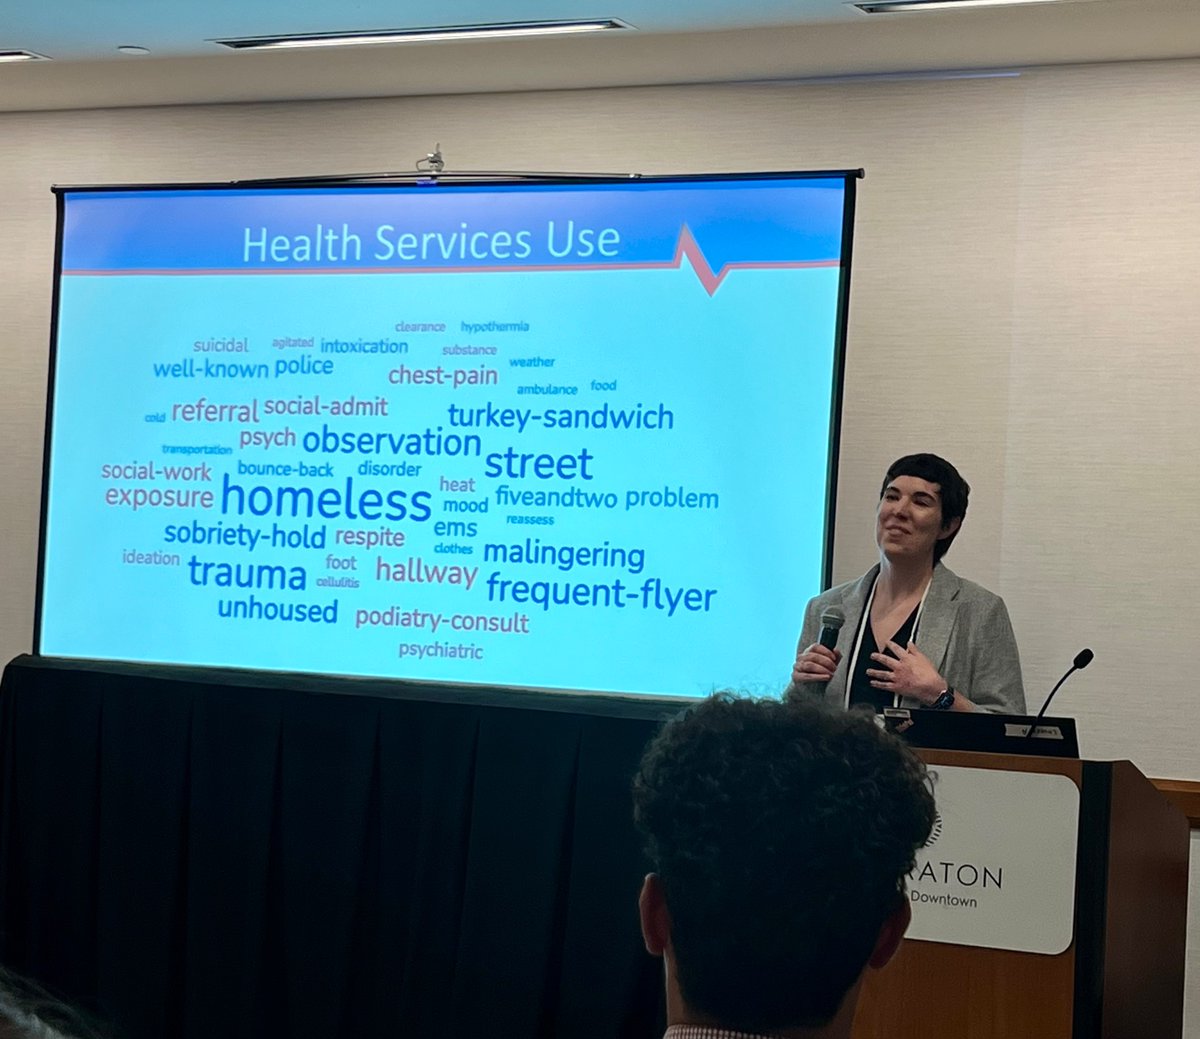 Yale #NIDA DAHRS fellow @CaitlinRyus dispelling commons myths about ED use and people with housing instability. Many do not use the ED at all, and most often it is for traumatic injuries. @Yale_EM @NIDAnews